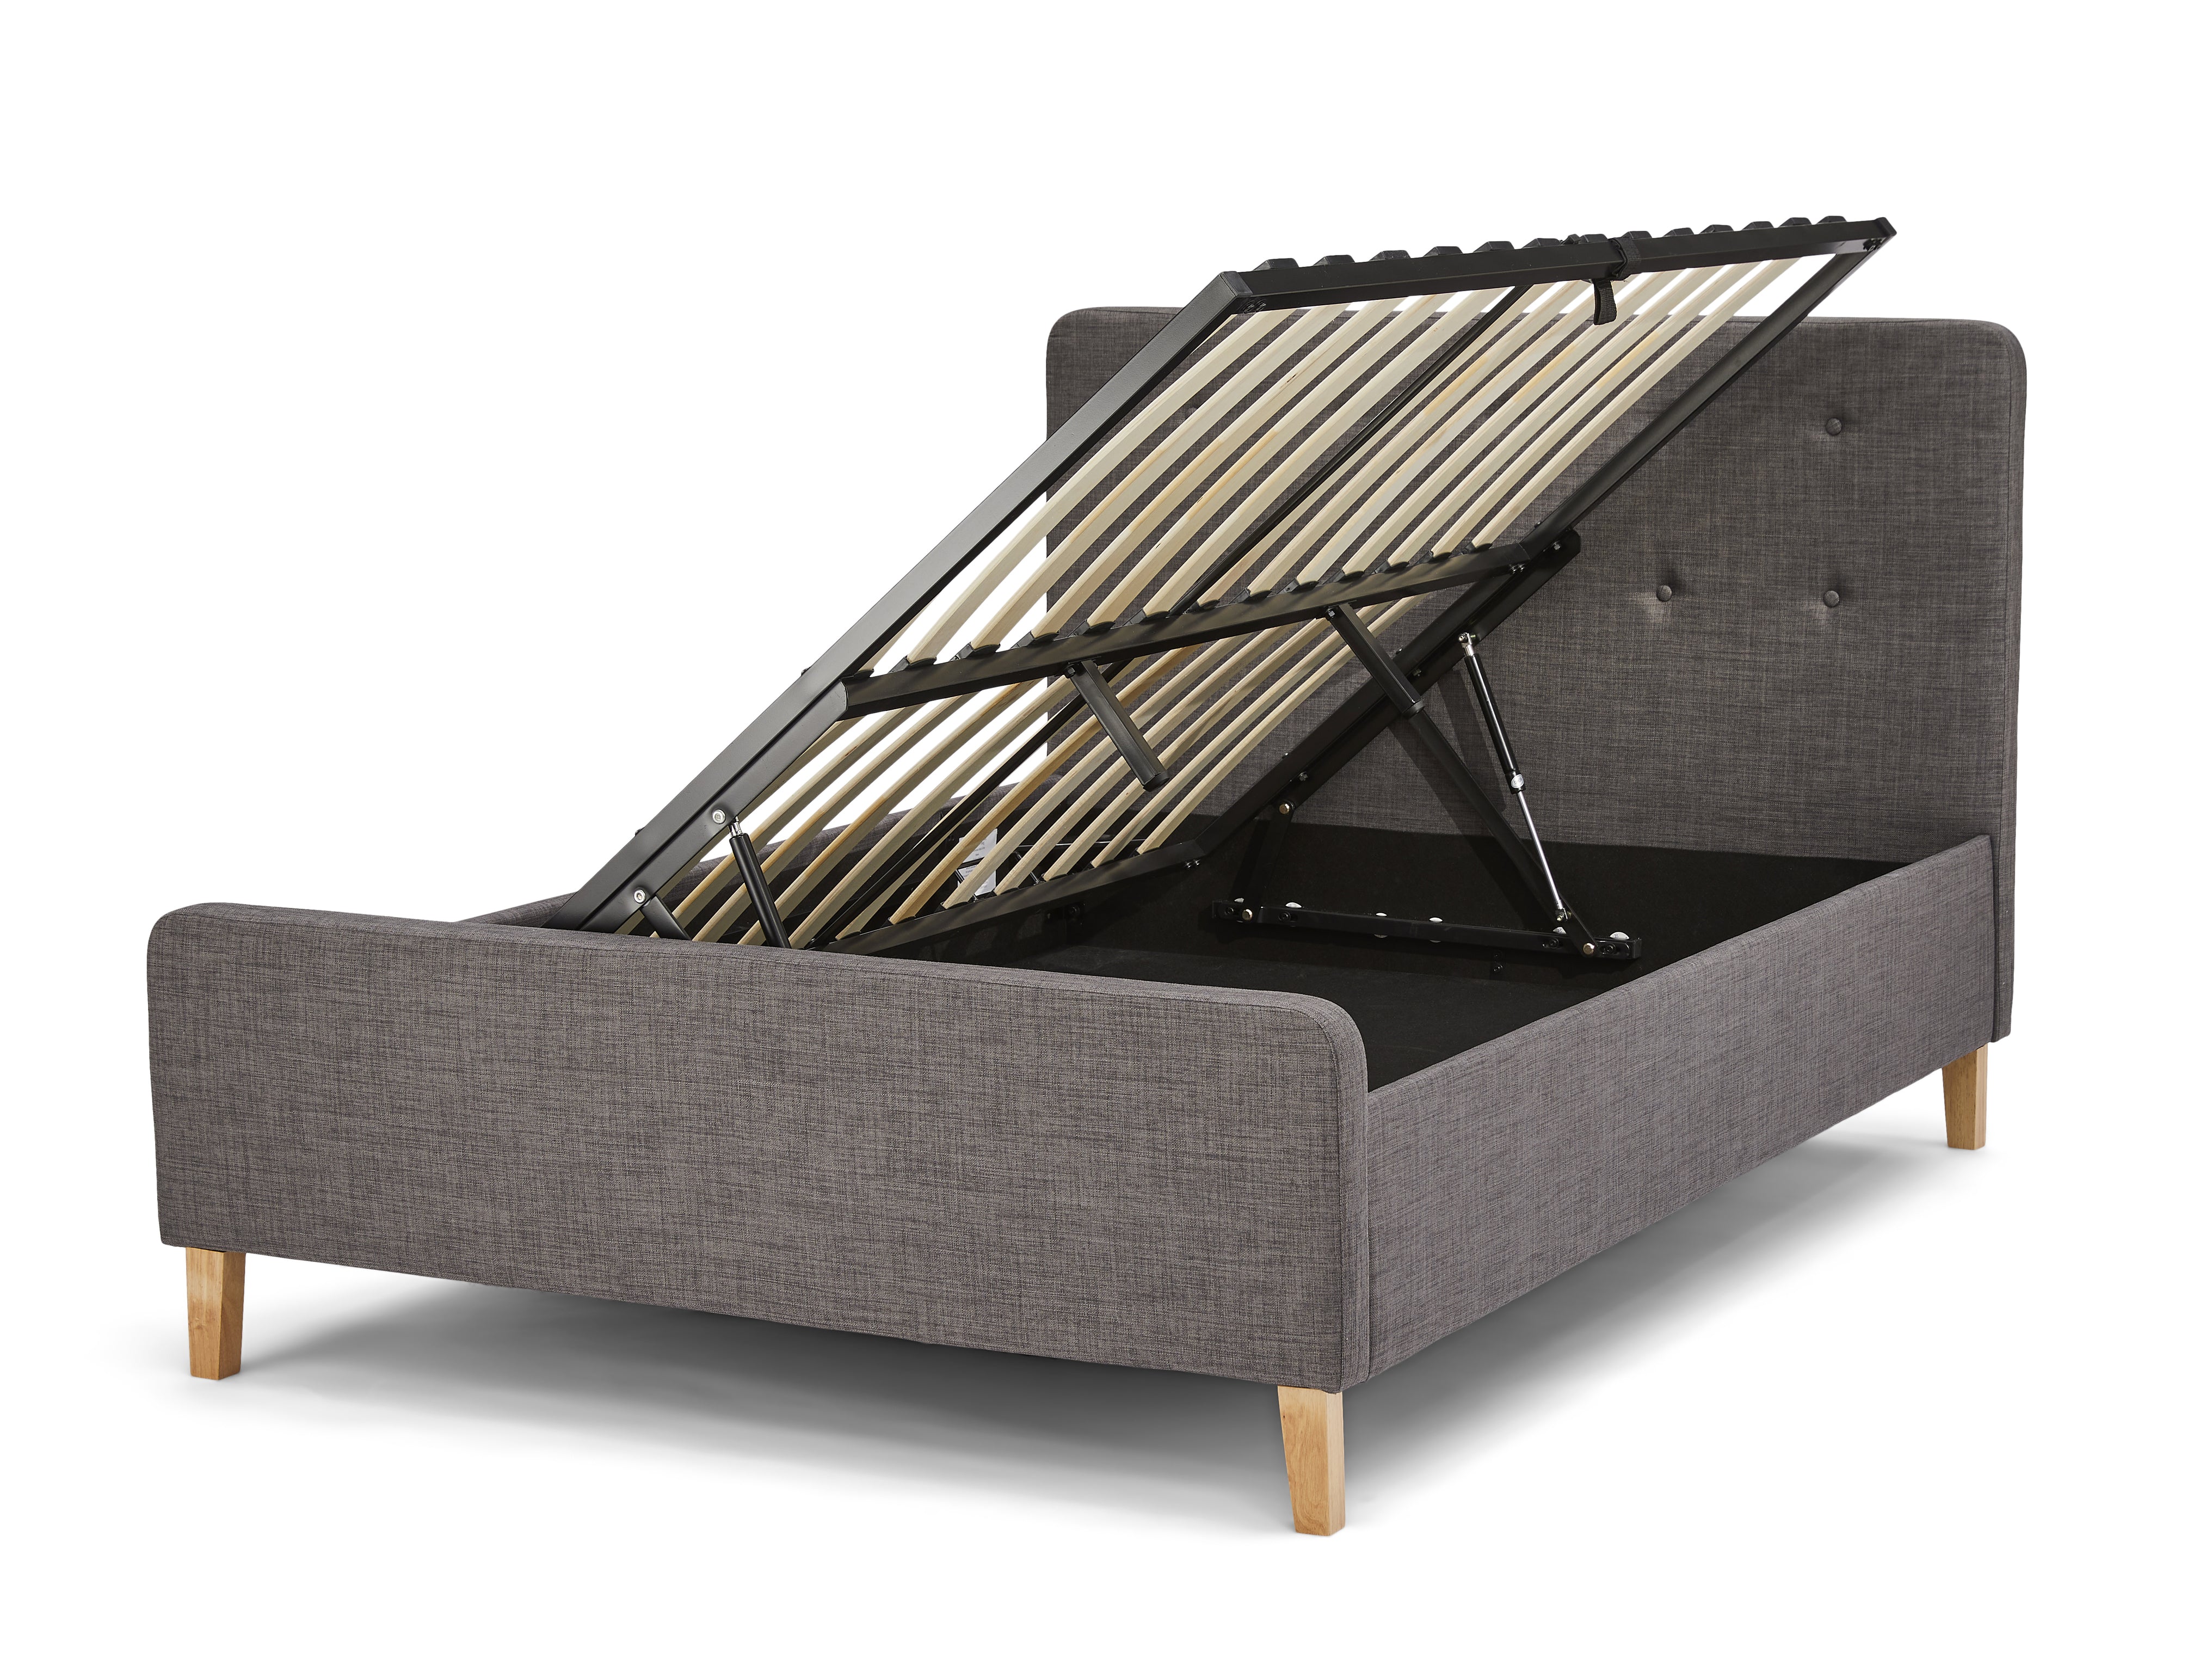 THE DREAMCLOUD OTTOMAN STORAGE BED